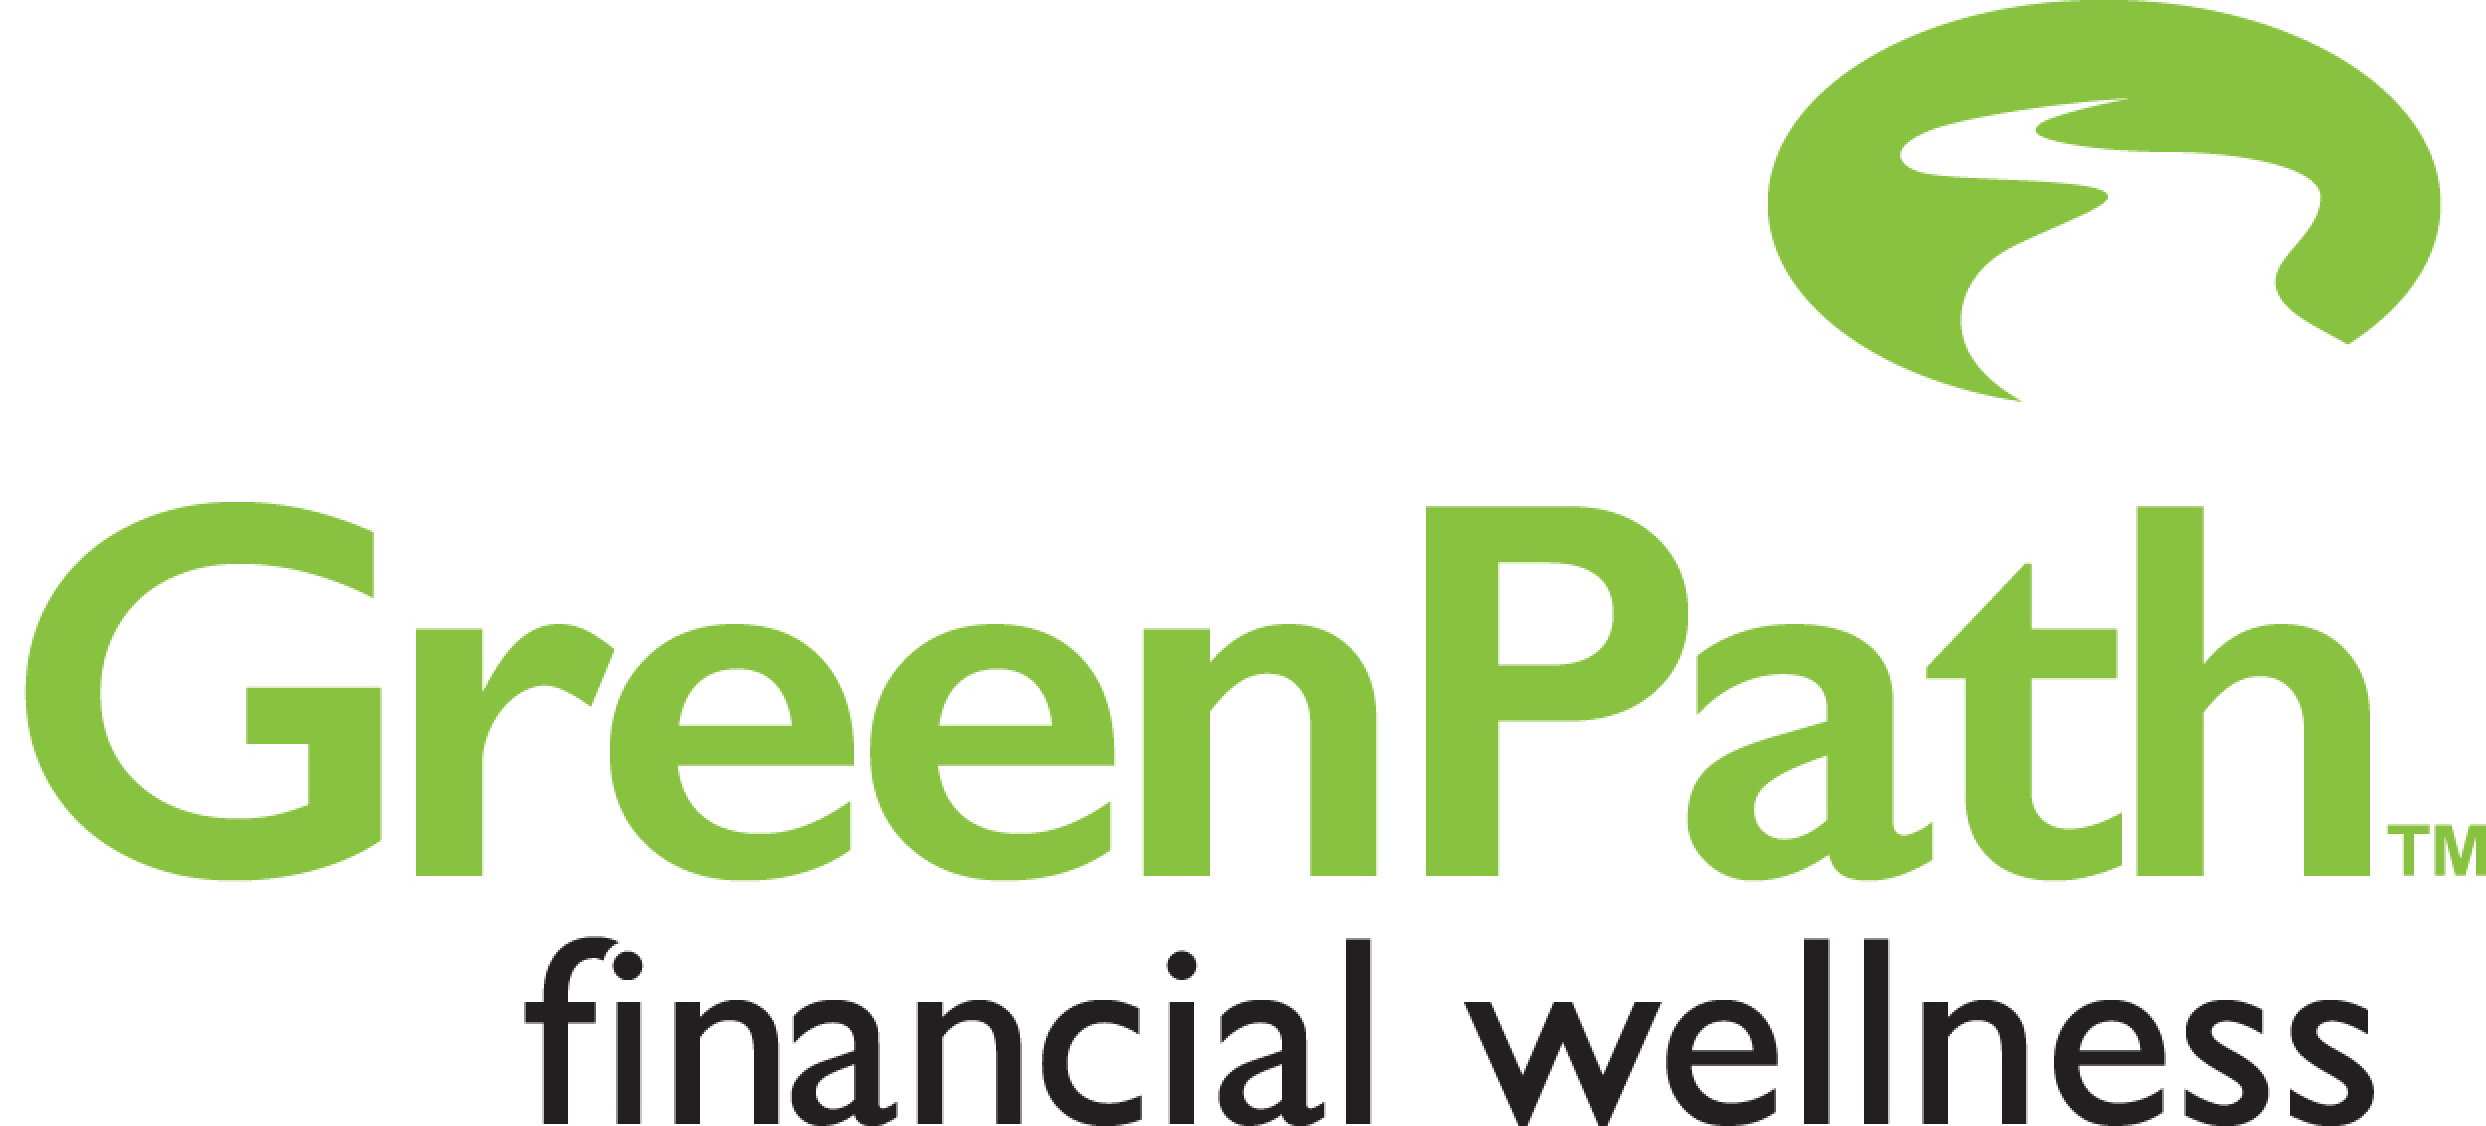 Greenpath partners with Canary fintech to offer an employee relief fund to support worker well-being